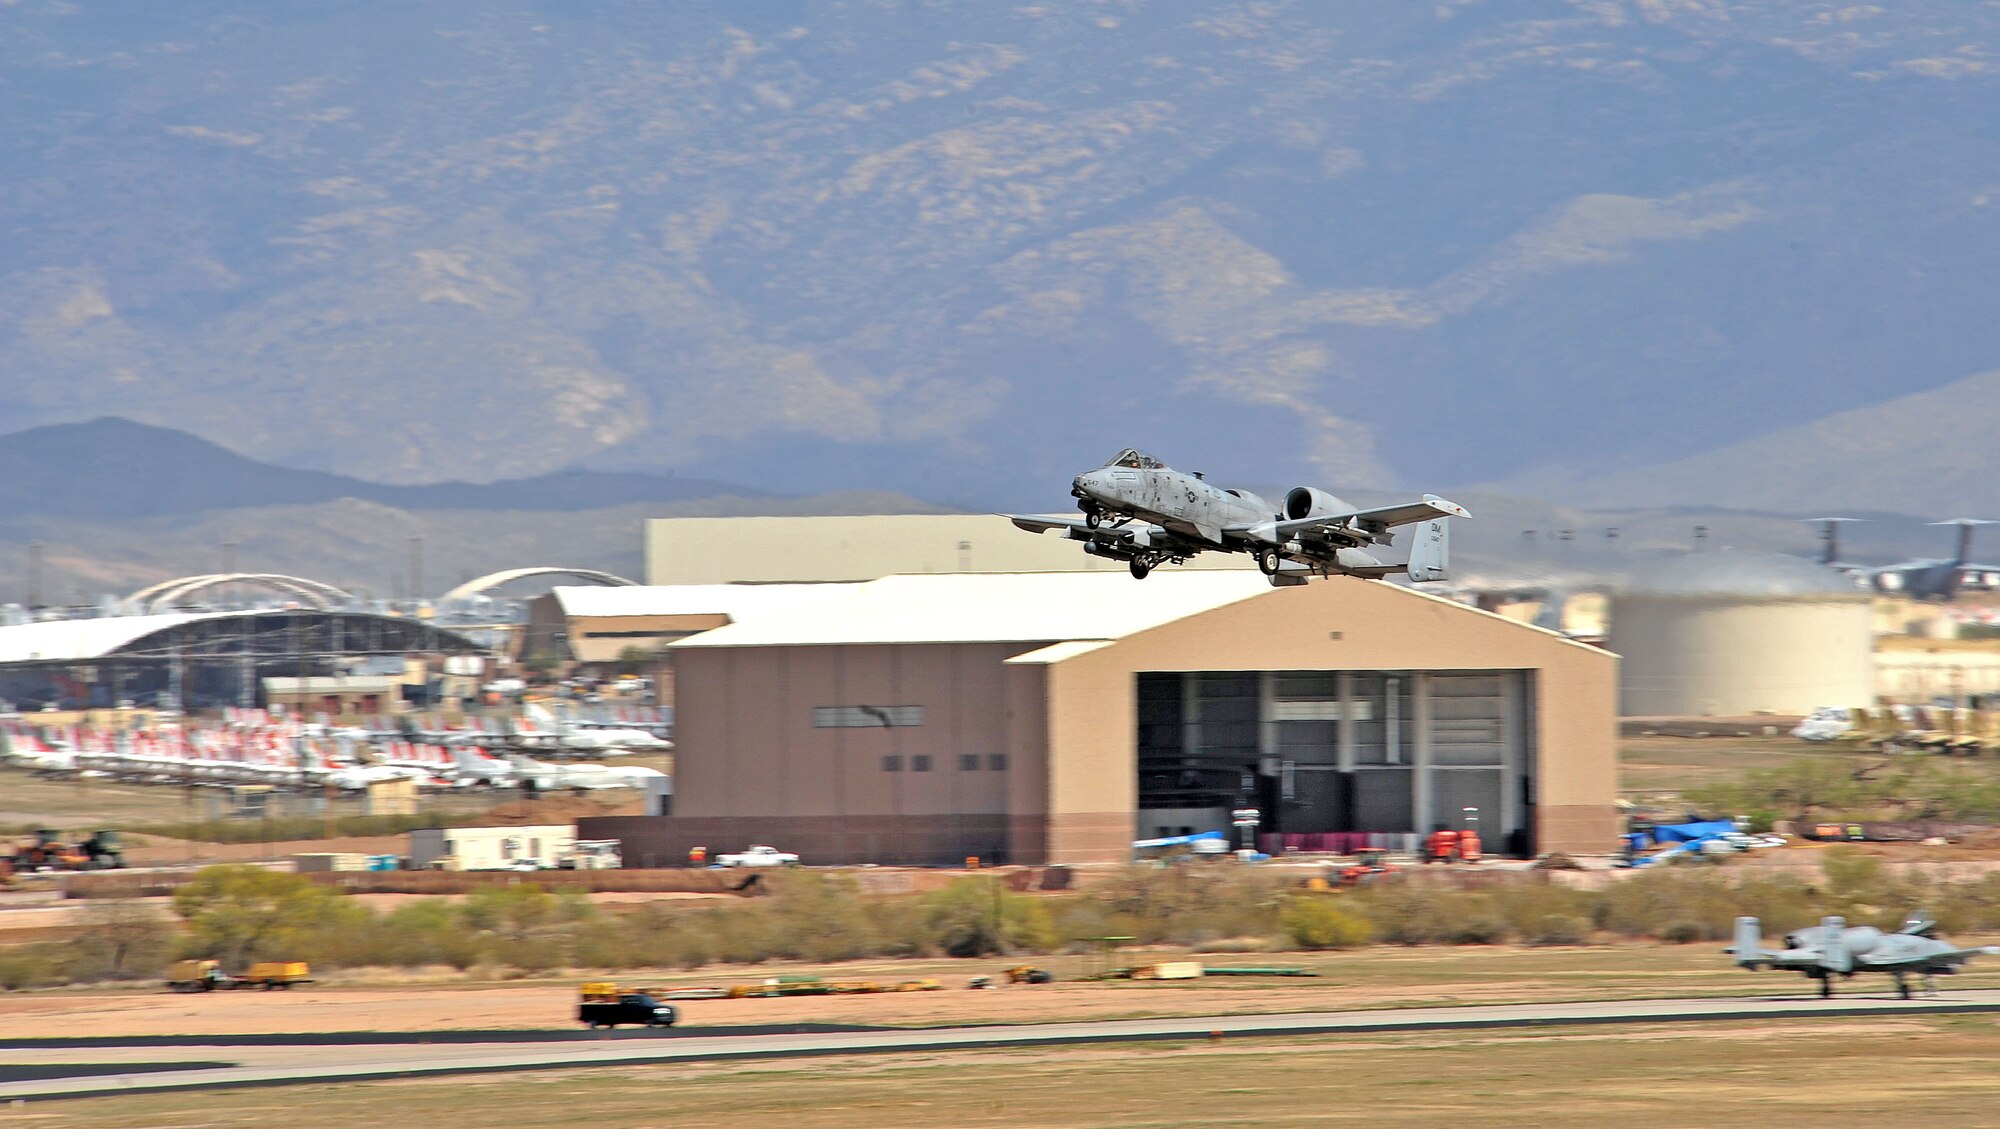 An A-10 Thunderbolt departs for a training mission at Davis-Monthan Air Force Base, Ariz., March 27, 2014. The A-10 is the first Air Force aircraft specially designed for close air support of ground forces. (U.S. Air Force photo by Senior Airman Josh Slavin/Released)